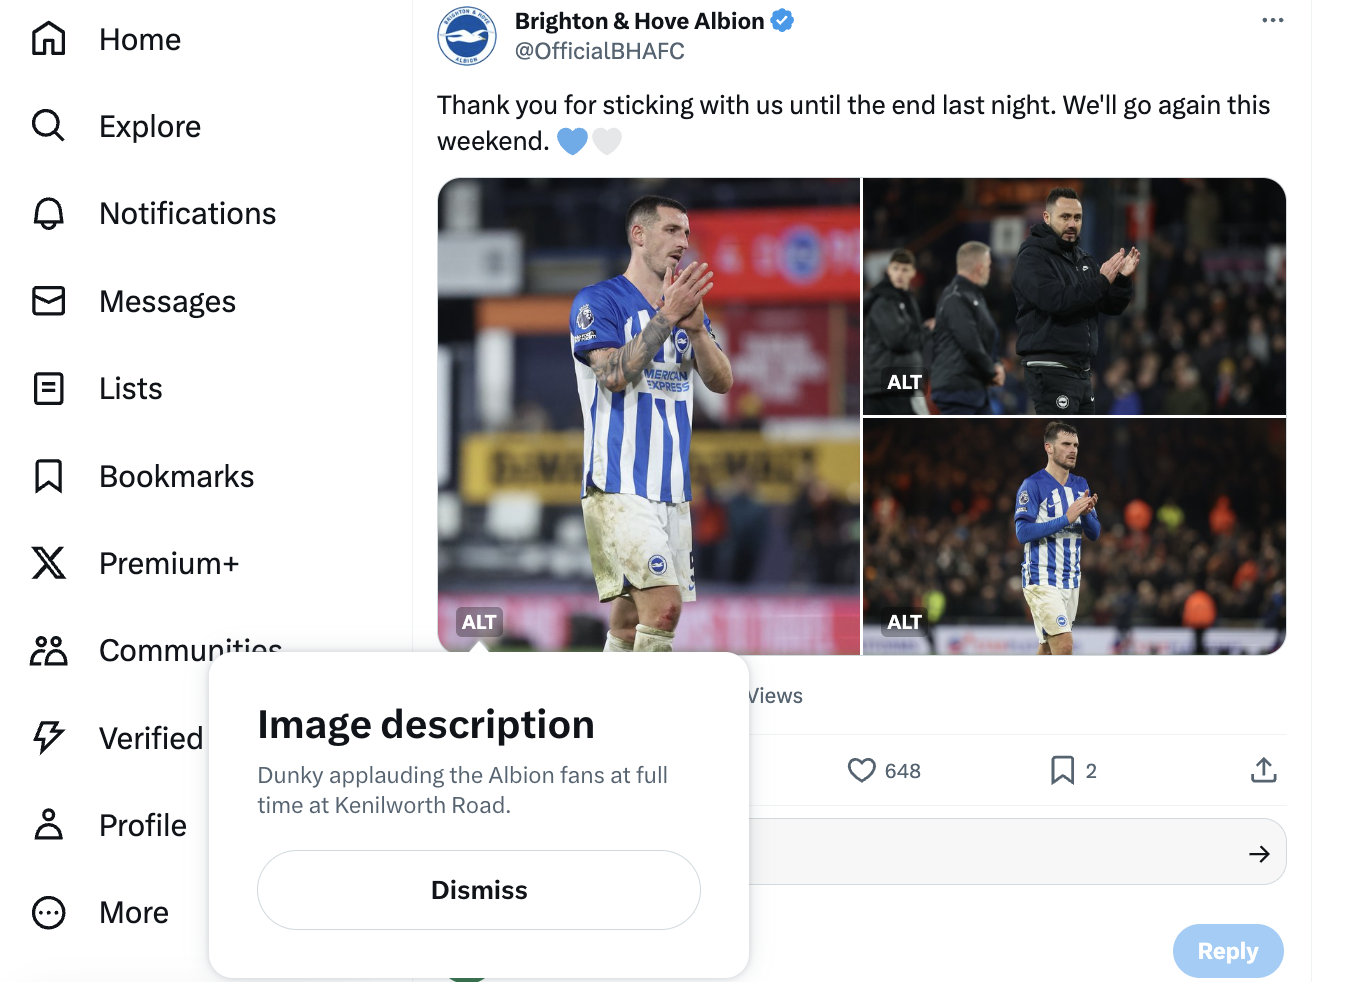 A screenshot showing a collage of images on X from Brighton's account, with the alt text "Dunky applauding the Albion fans at full time at Kenilworth Road"